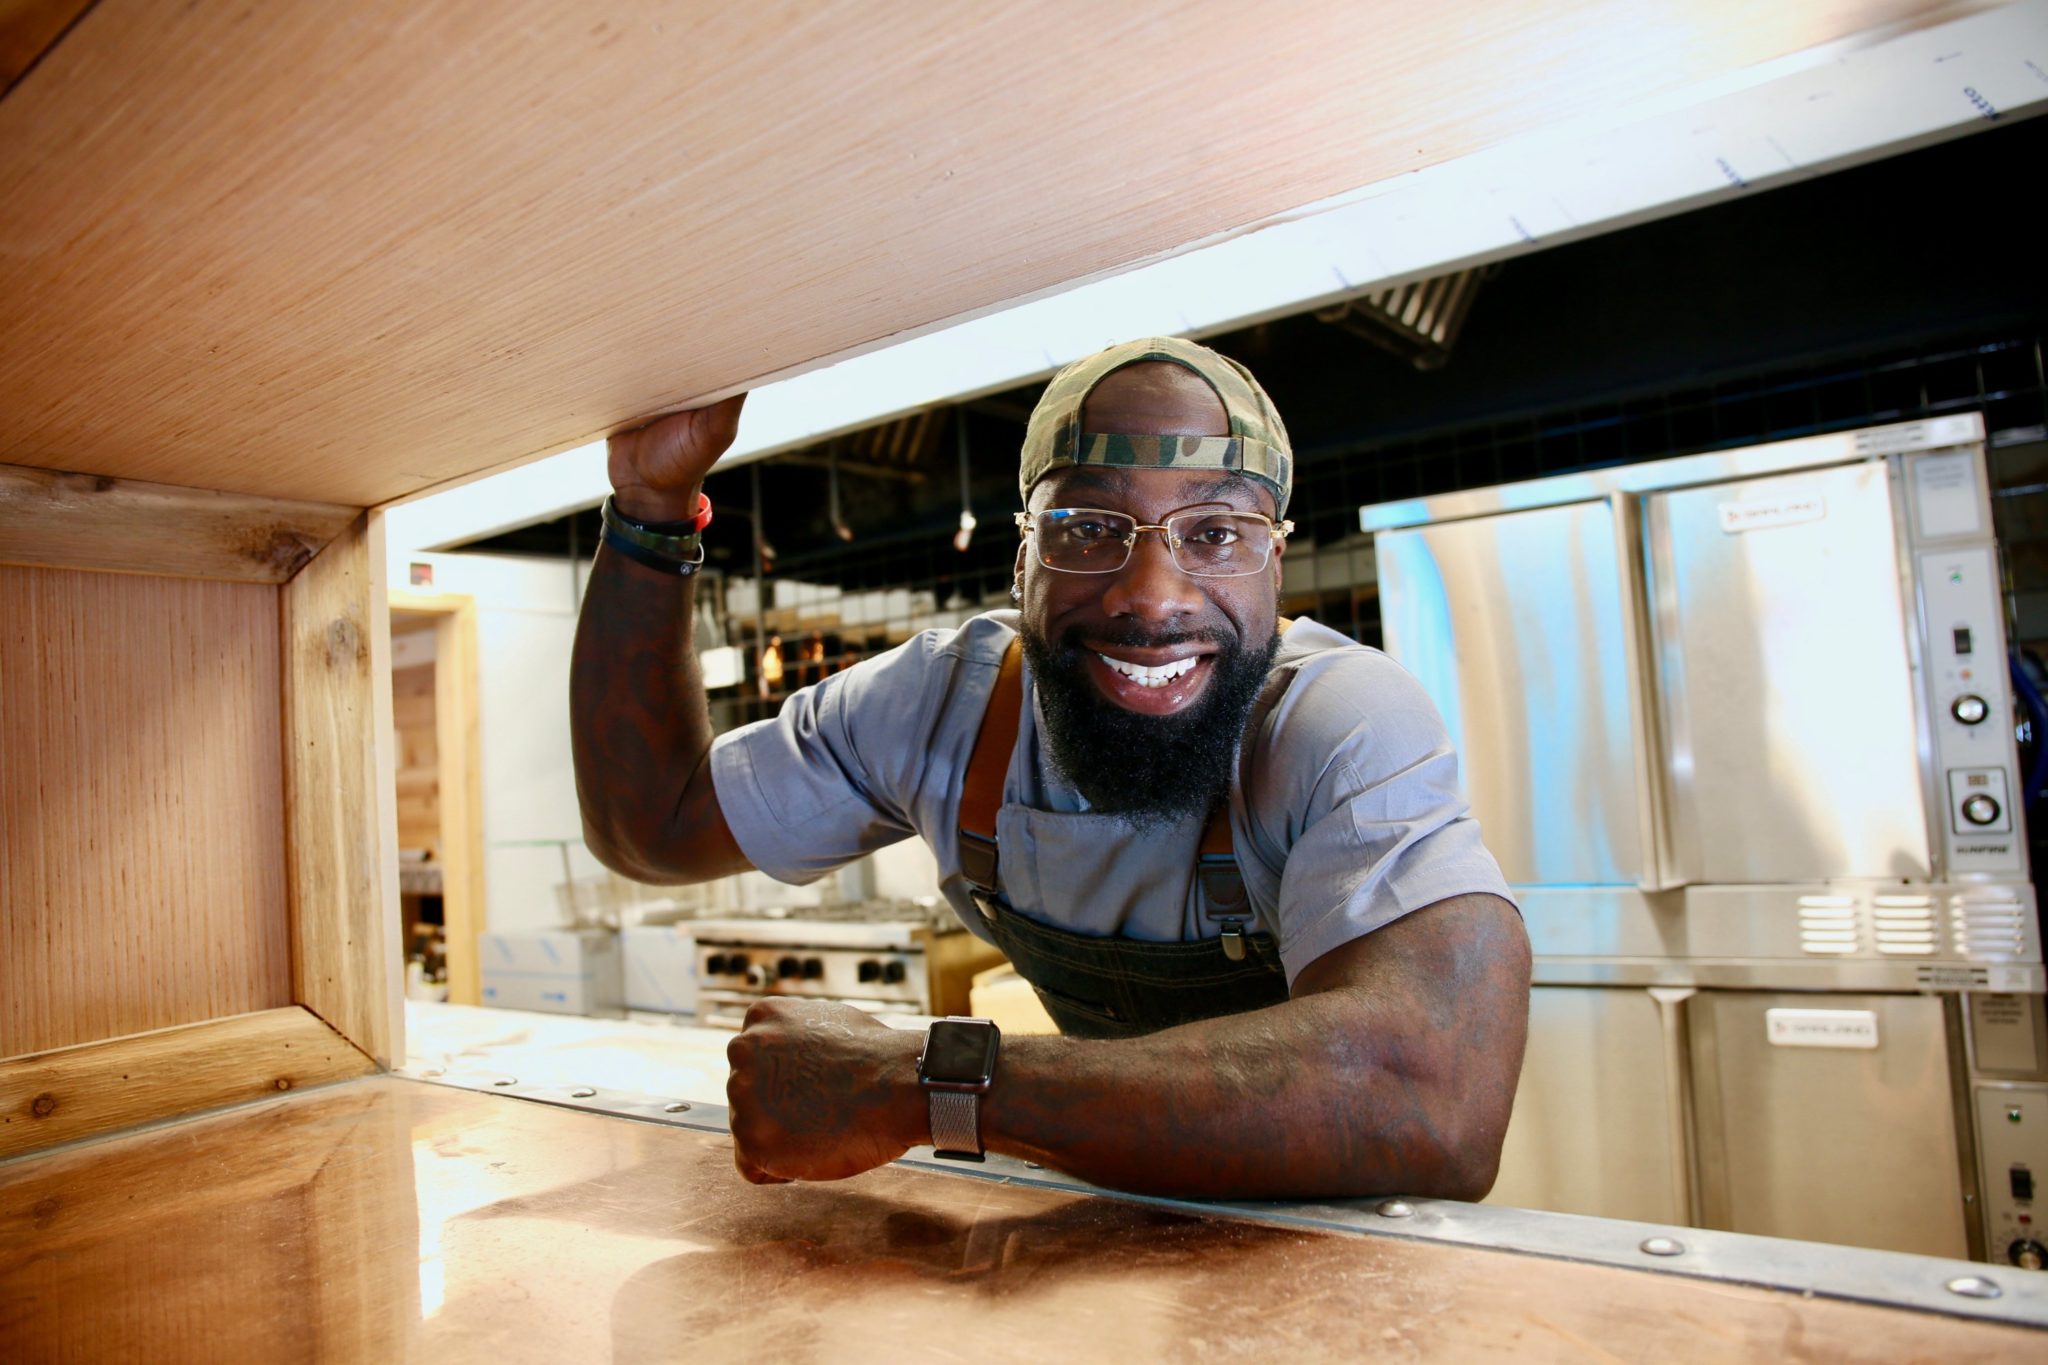 Meet The Nfl Player Turned Chef Opening An Oyster Bar In Dc